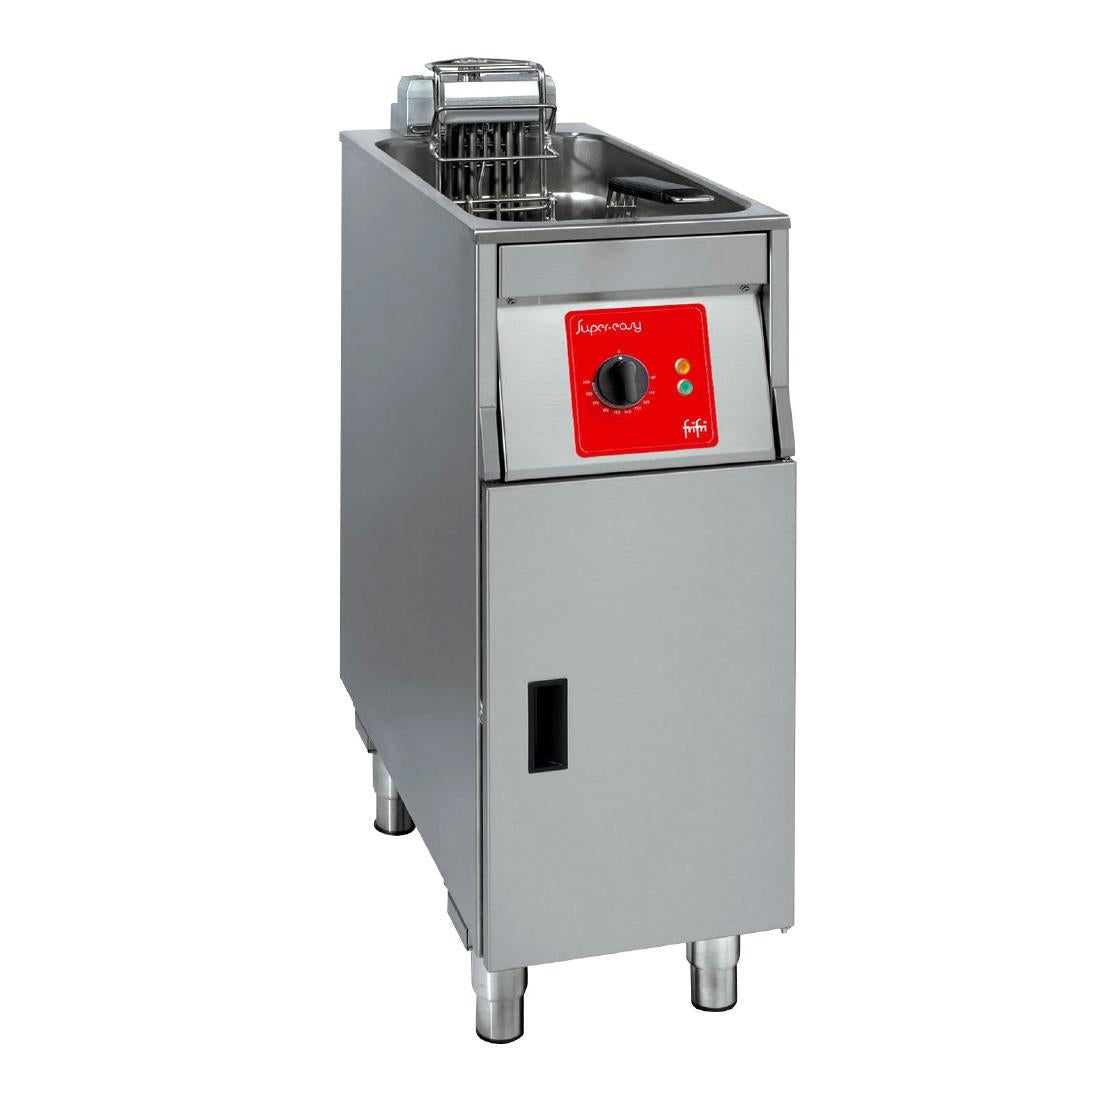 HS054-3PH FriFri Super Easy 311 Electric Free-standing Fryer Single Tank Single Basket without Filtration 15kW Three Phase